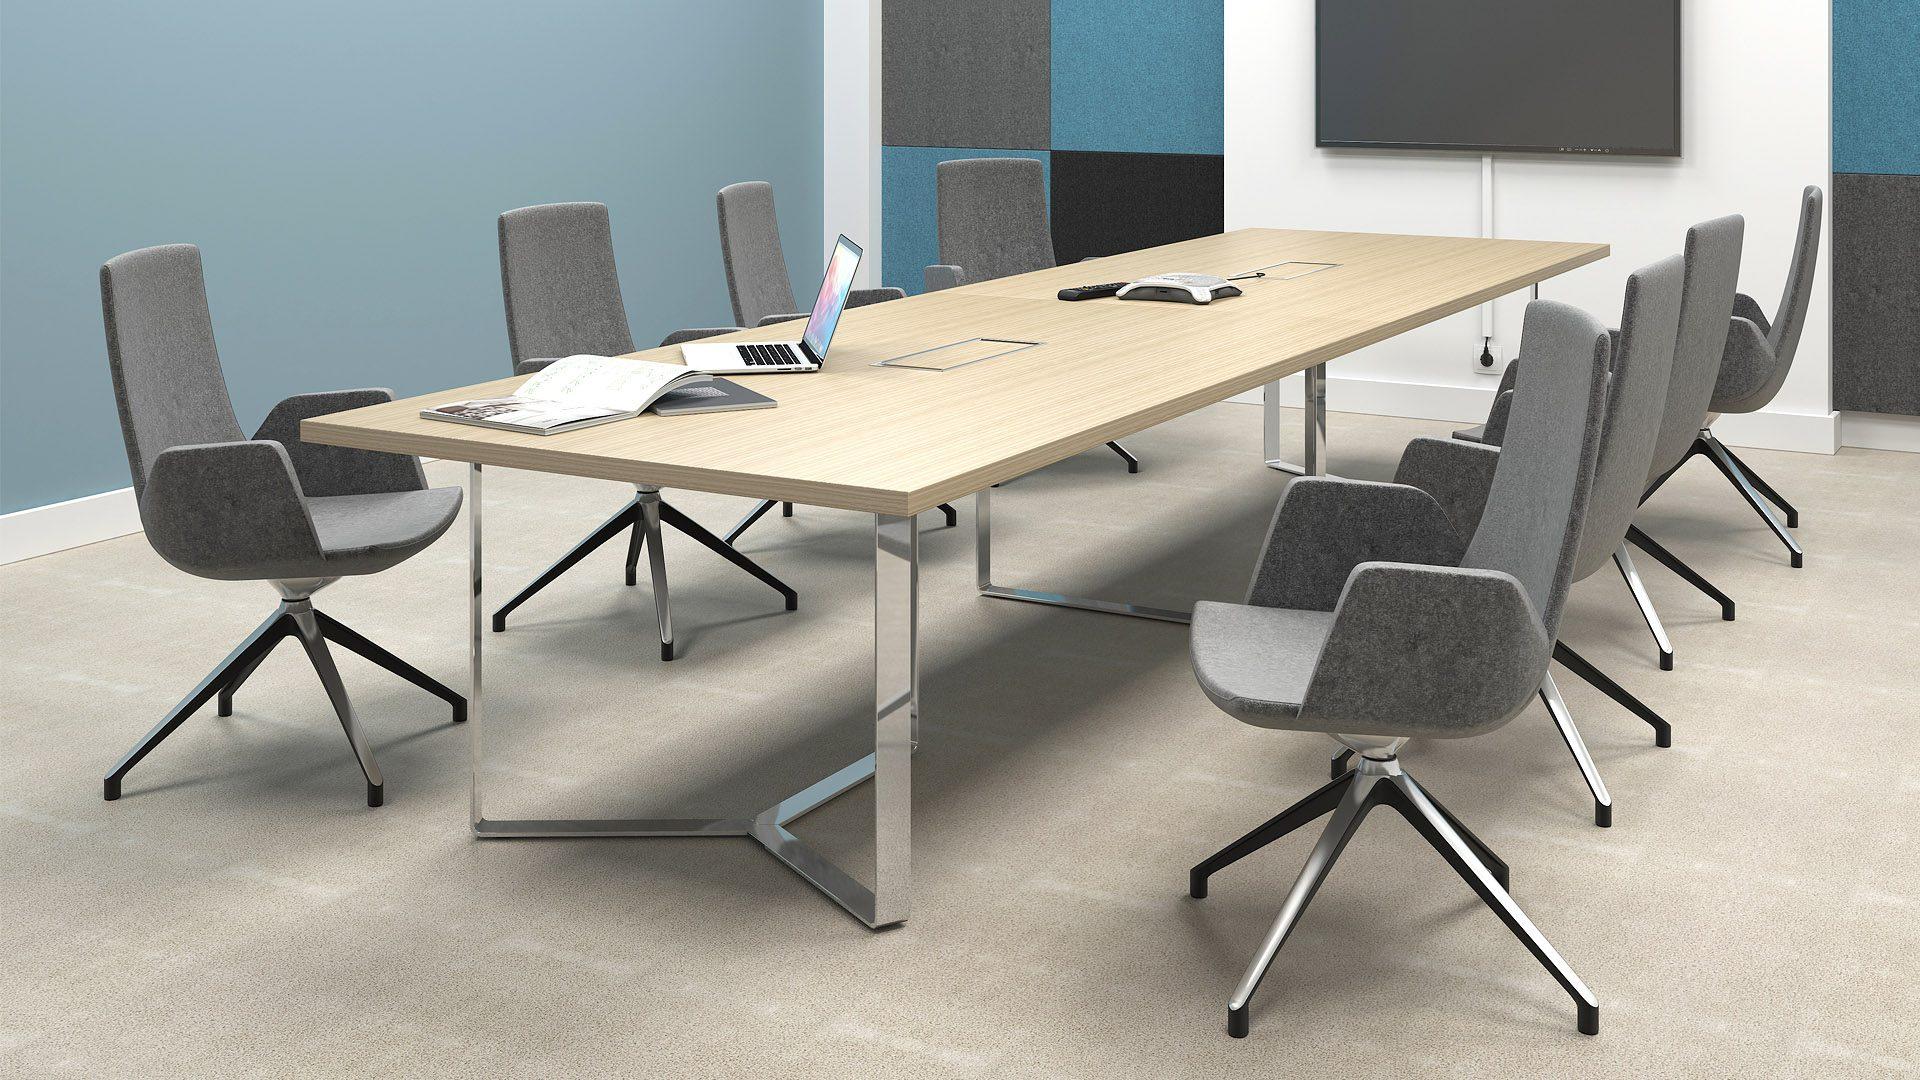 North Cape meeting chairs are available in a variety of fabric colours with or without armrests